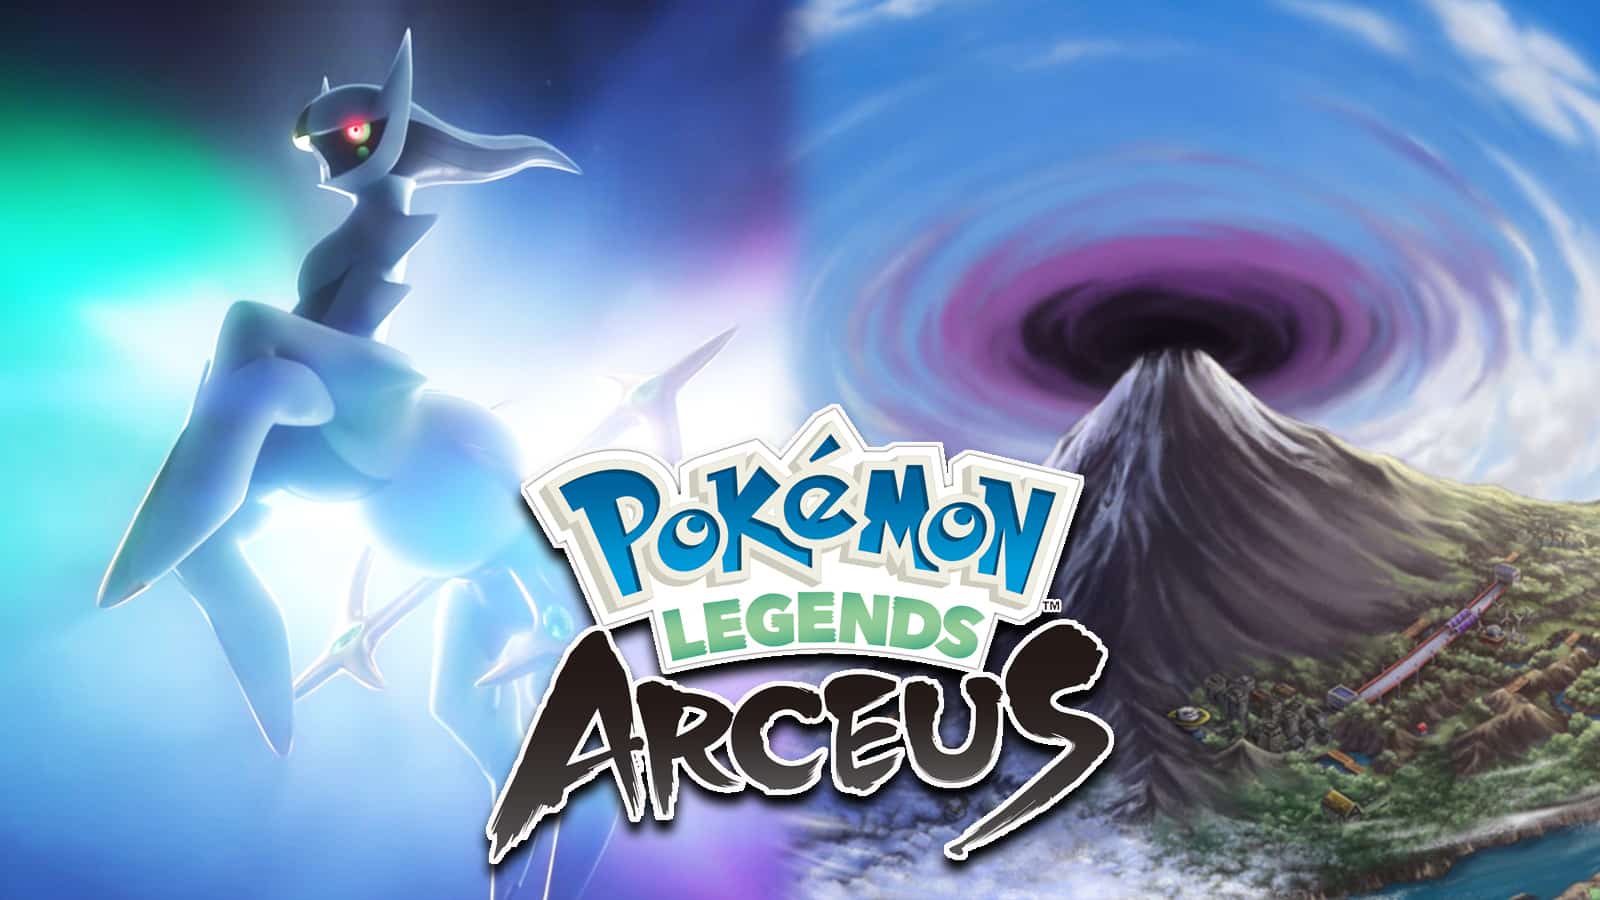 Why Pokemon Legends Arceus trailers are actually worrying - Dexerto